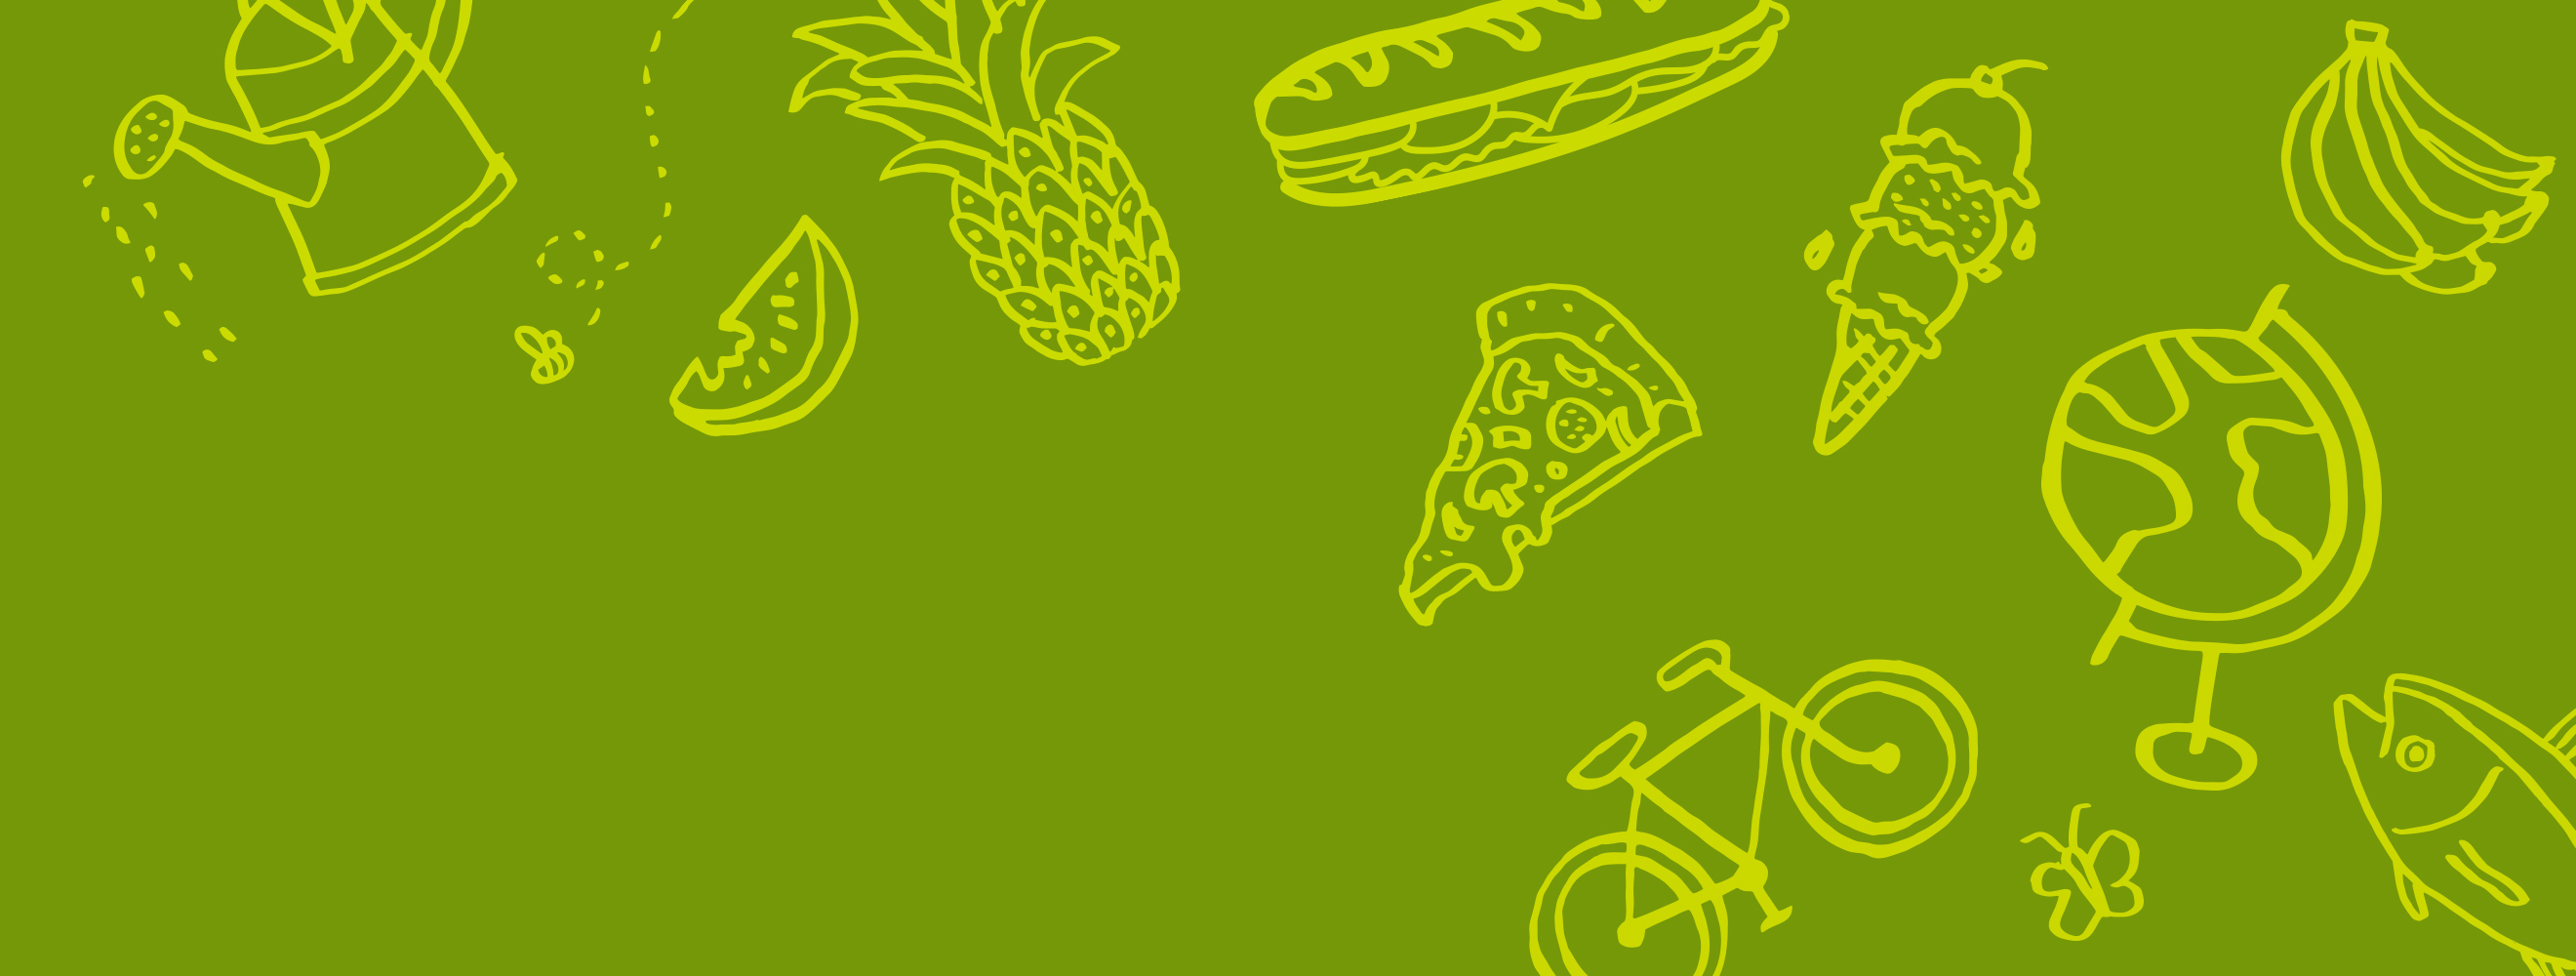 Green background with lighter green illustrations of bicycle, ice cream, globe, fish and bananas.